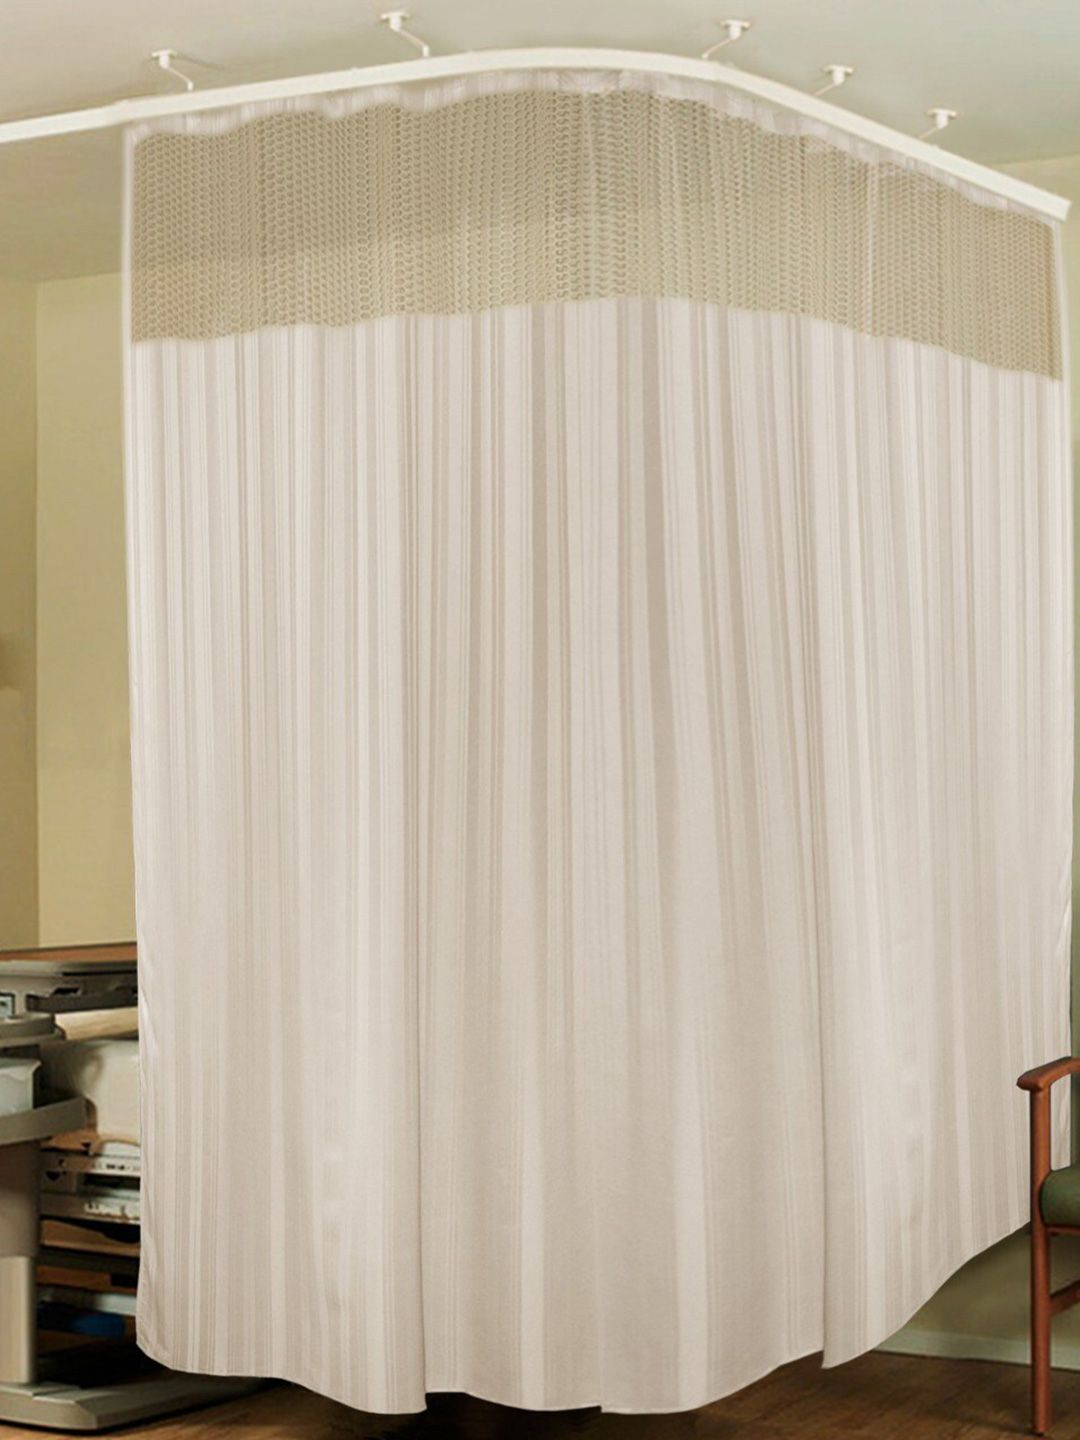 Lushomes White Striped Long Hospital Curtain with 24 Eyelets & 24 C-hooks Price in India